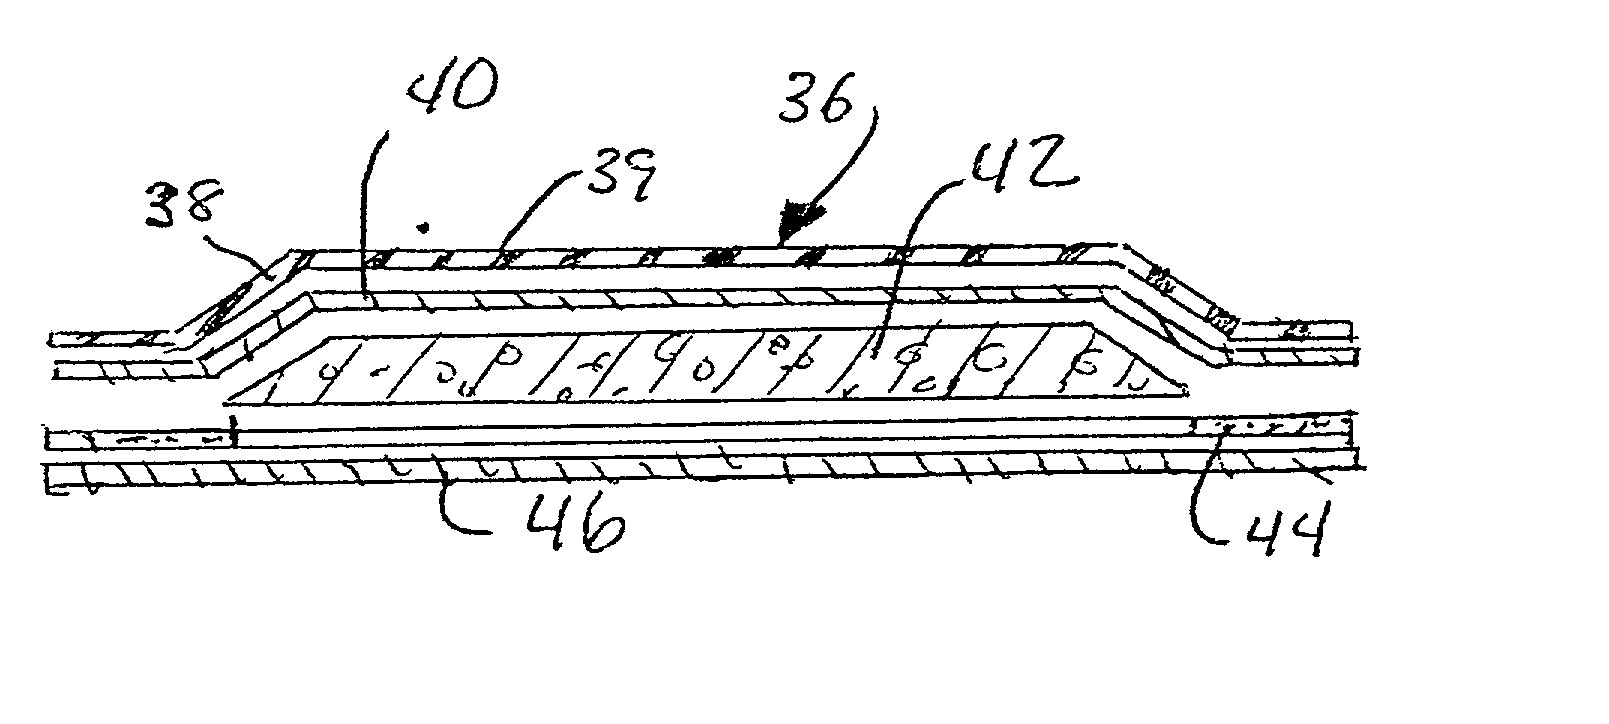 Self-adhering friction reducing liner and method of use